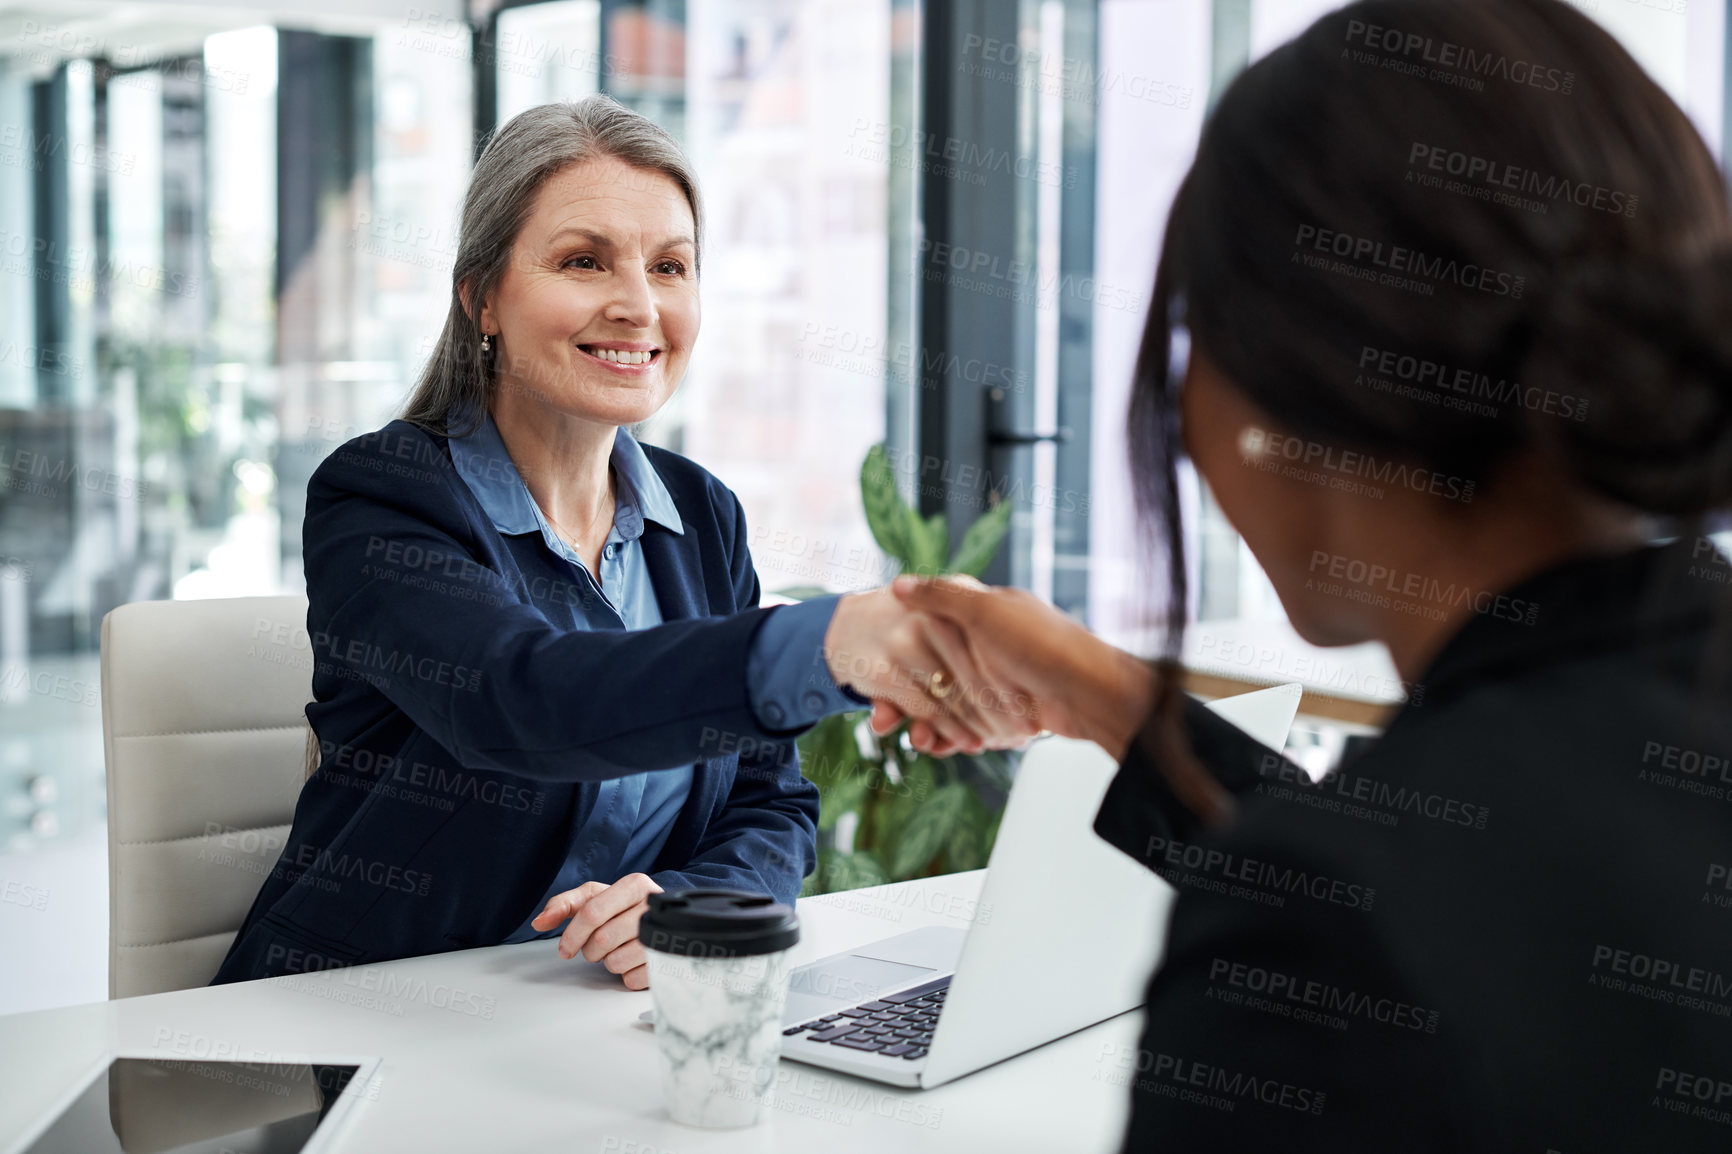 Buy stock photo Shot of a mature businesswoman shaking hands with a colleague during a meeting in a modern office